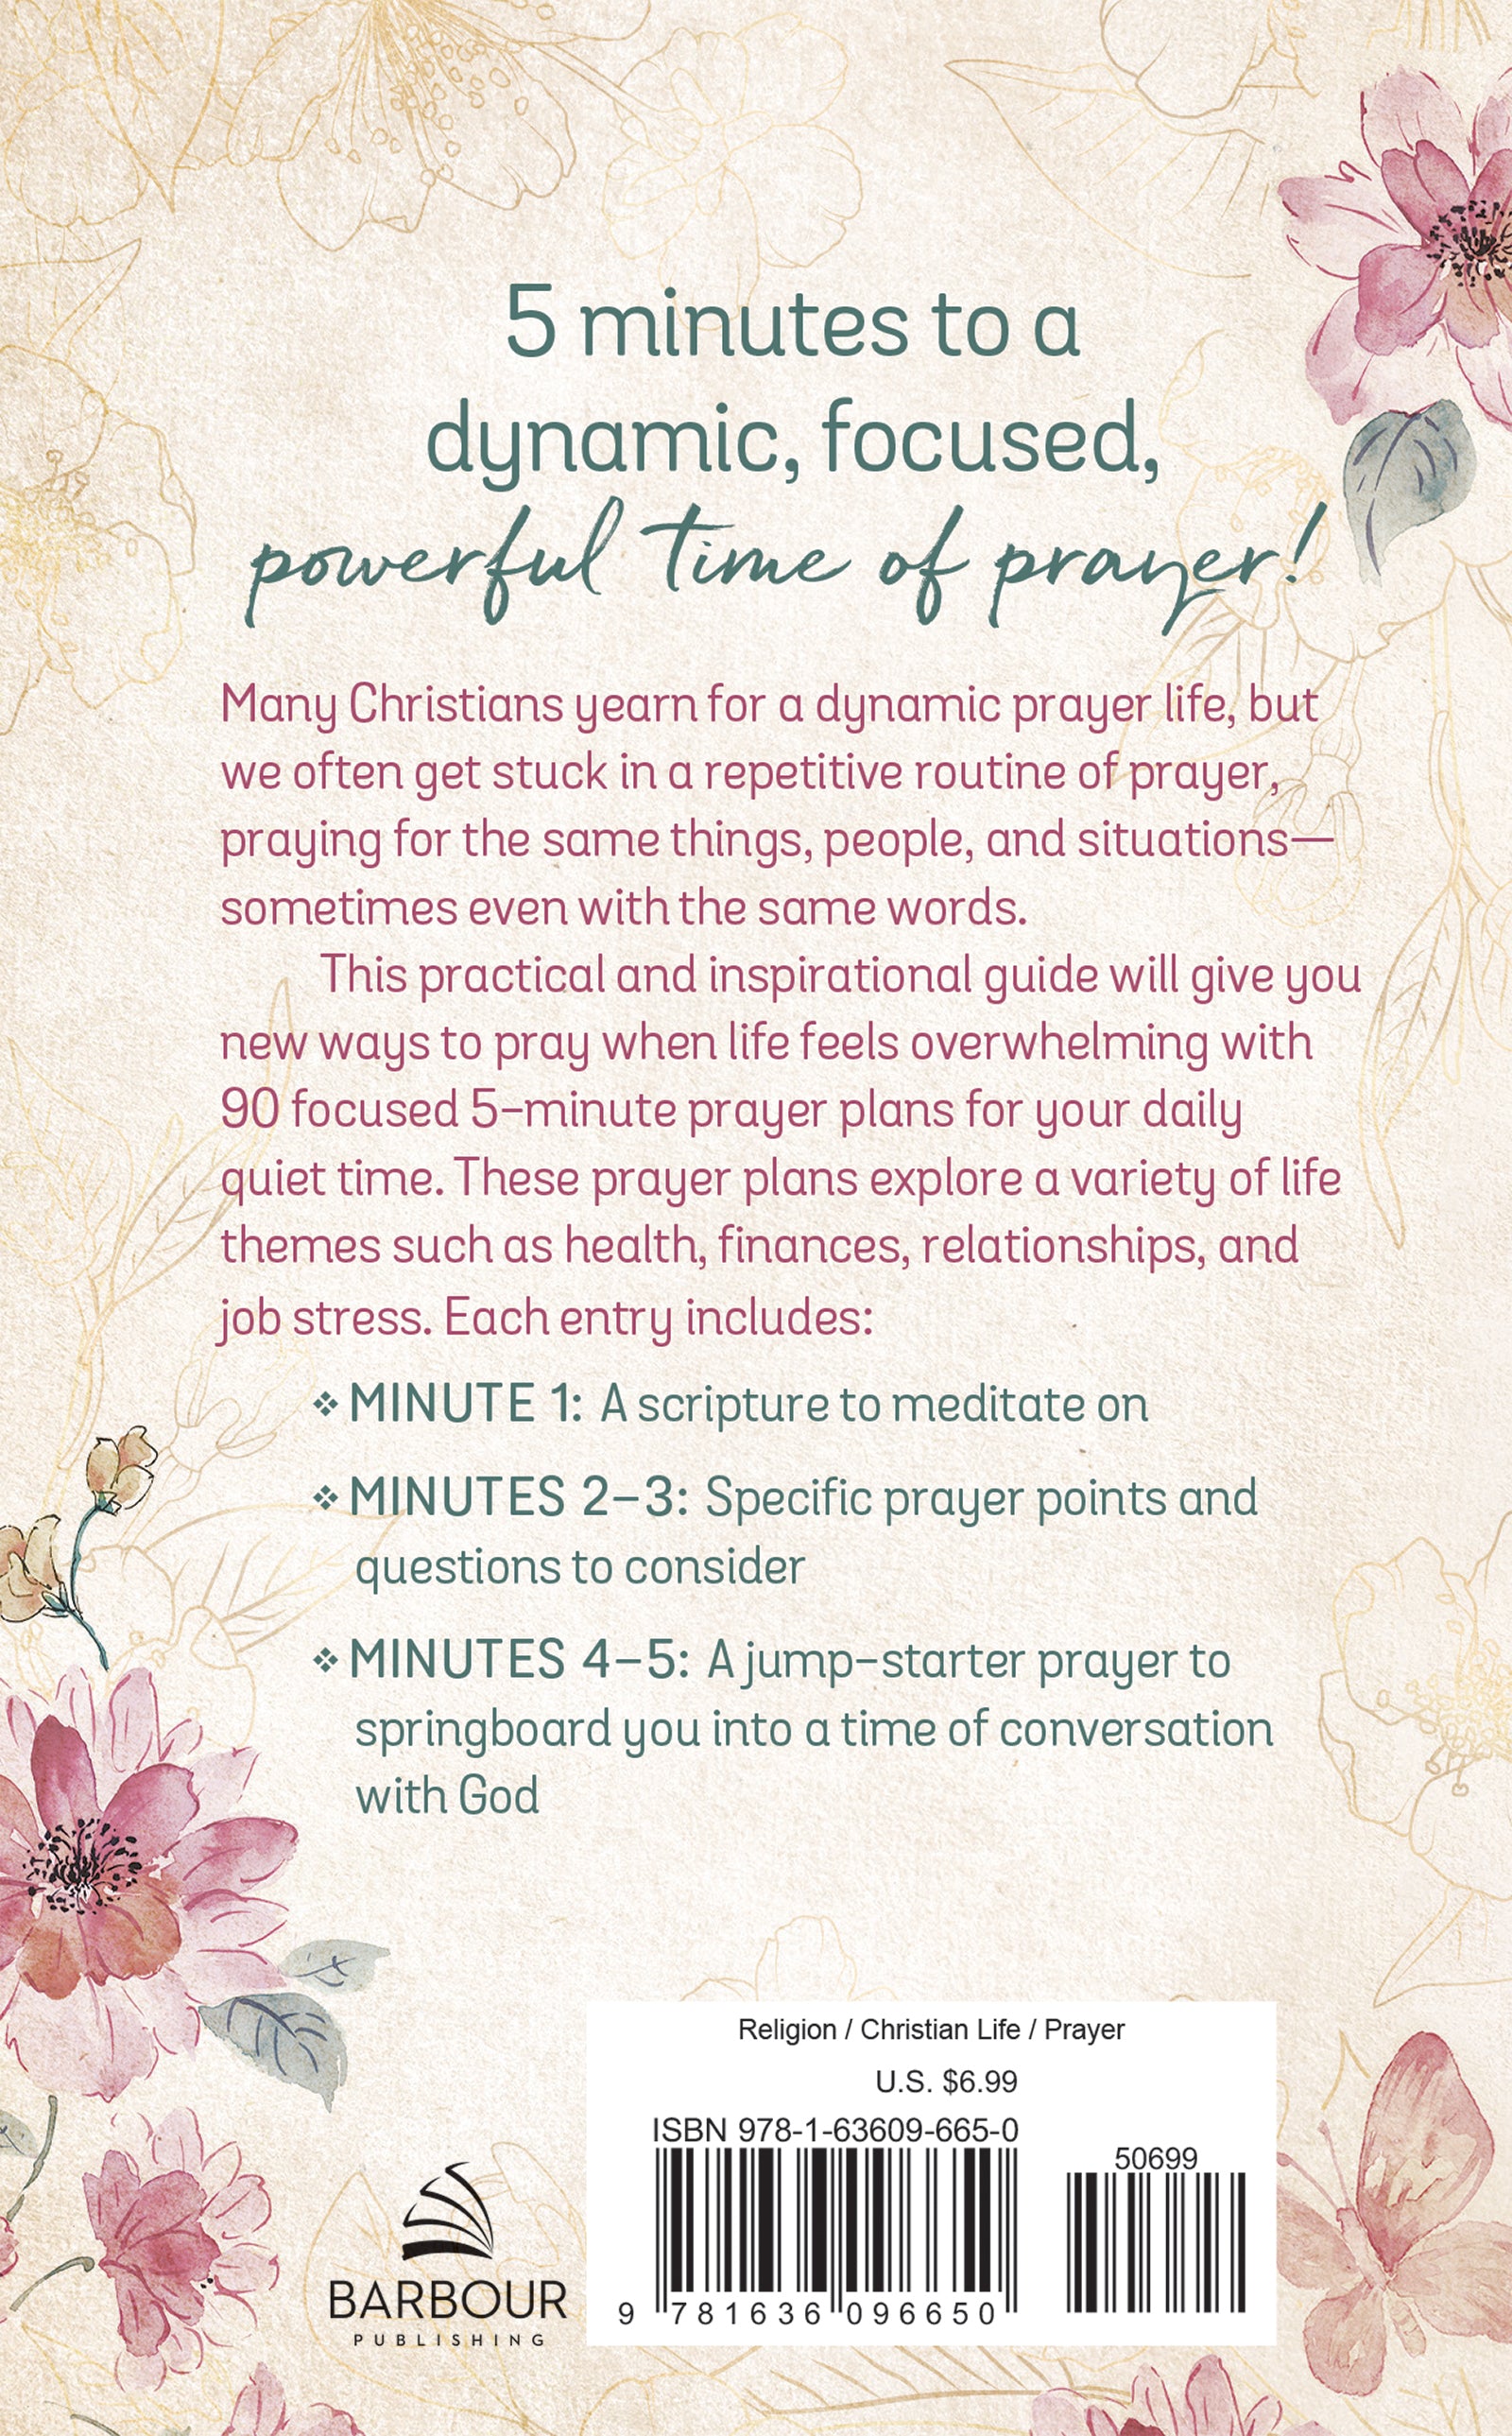 The 5-Minute Prayer Plan for When Life Is Overwhelming - The Christian Gift Company